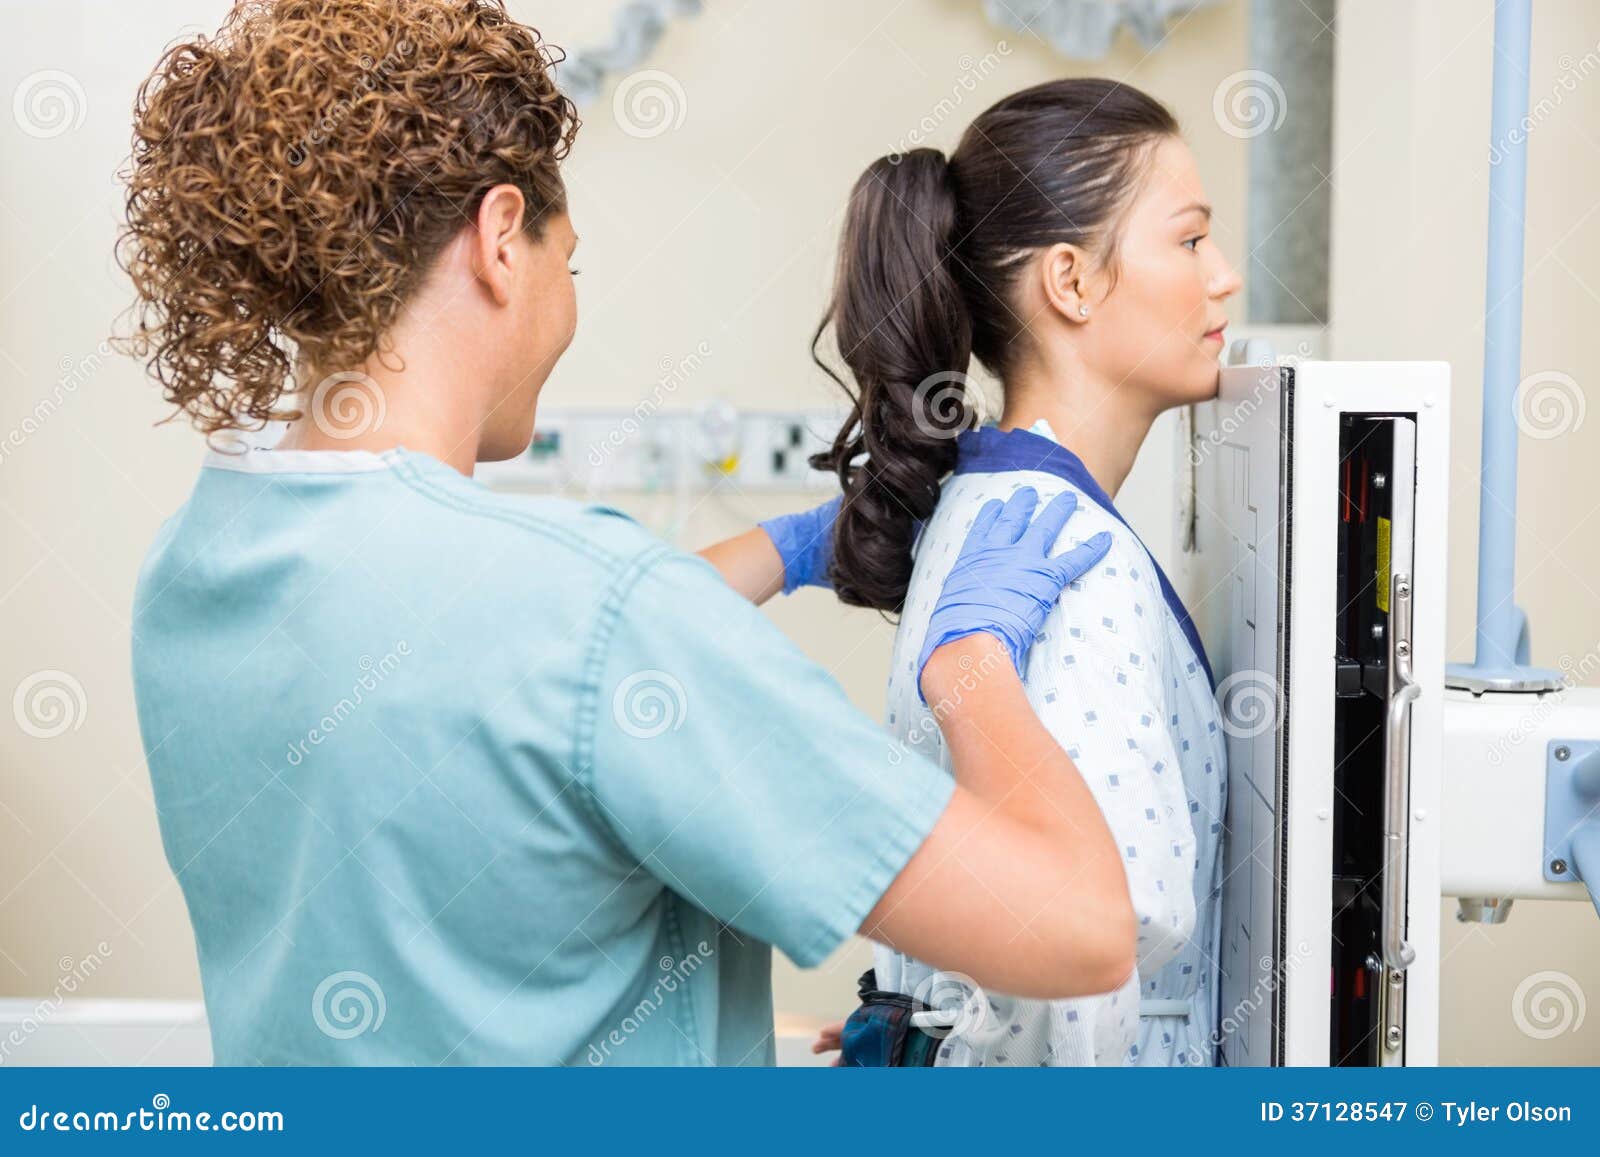 Nurse Preparing Patient For Chest Xray Royalty Free Stock